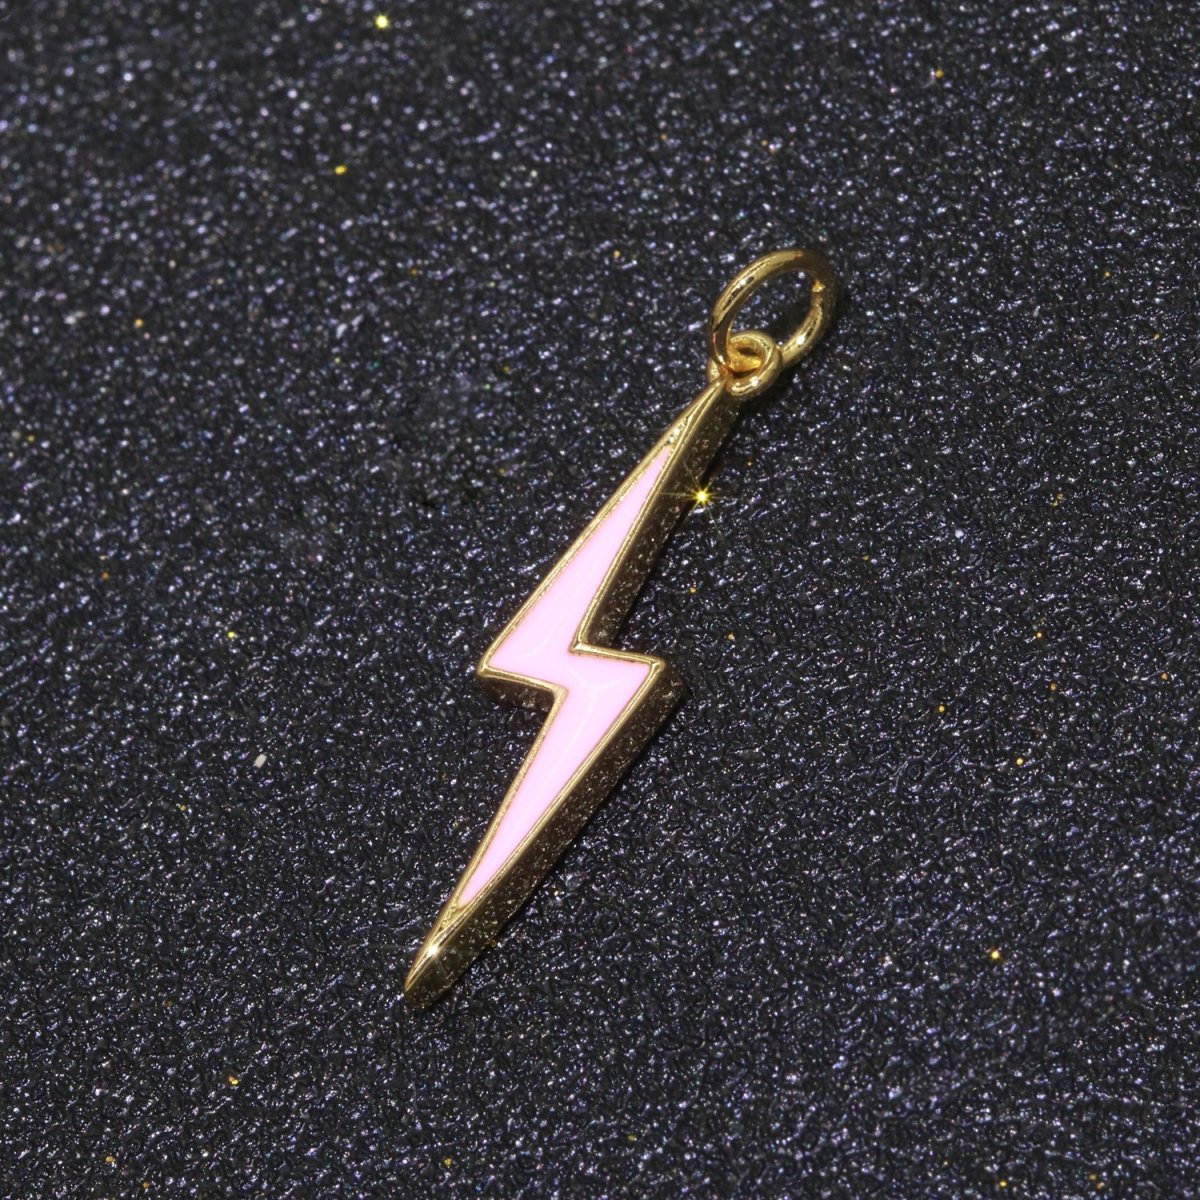 14K Gold Filled Colorful Enamel Lightning Thunder Bolt Pendant Charm For Wholesale Pendants and Charms Jewelry Making Craft Supplies M-305 to M-314 - DLUXCA